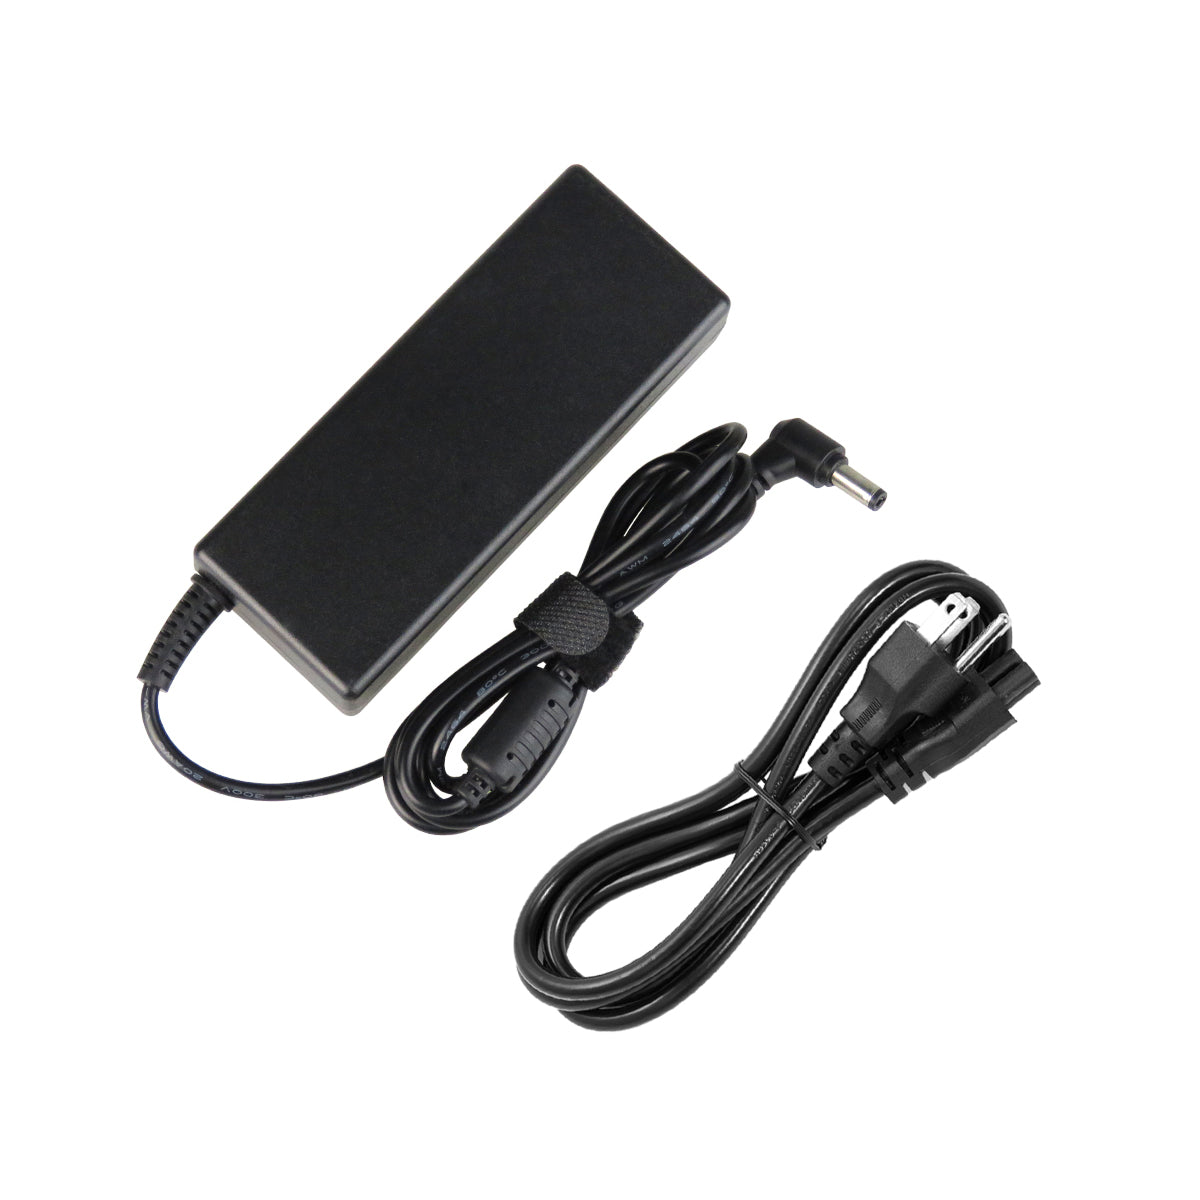 AC Adapter Charger for ASUS A54 Notebook.